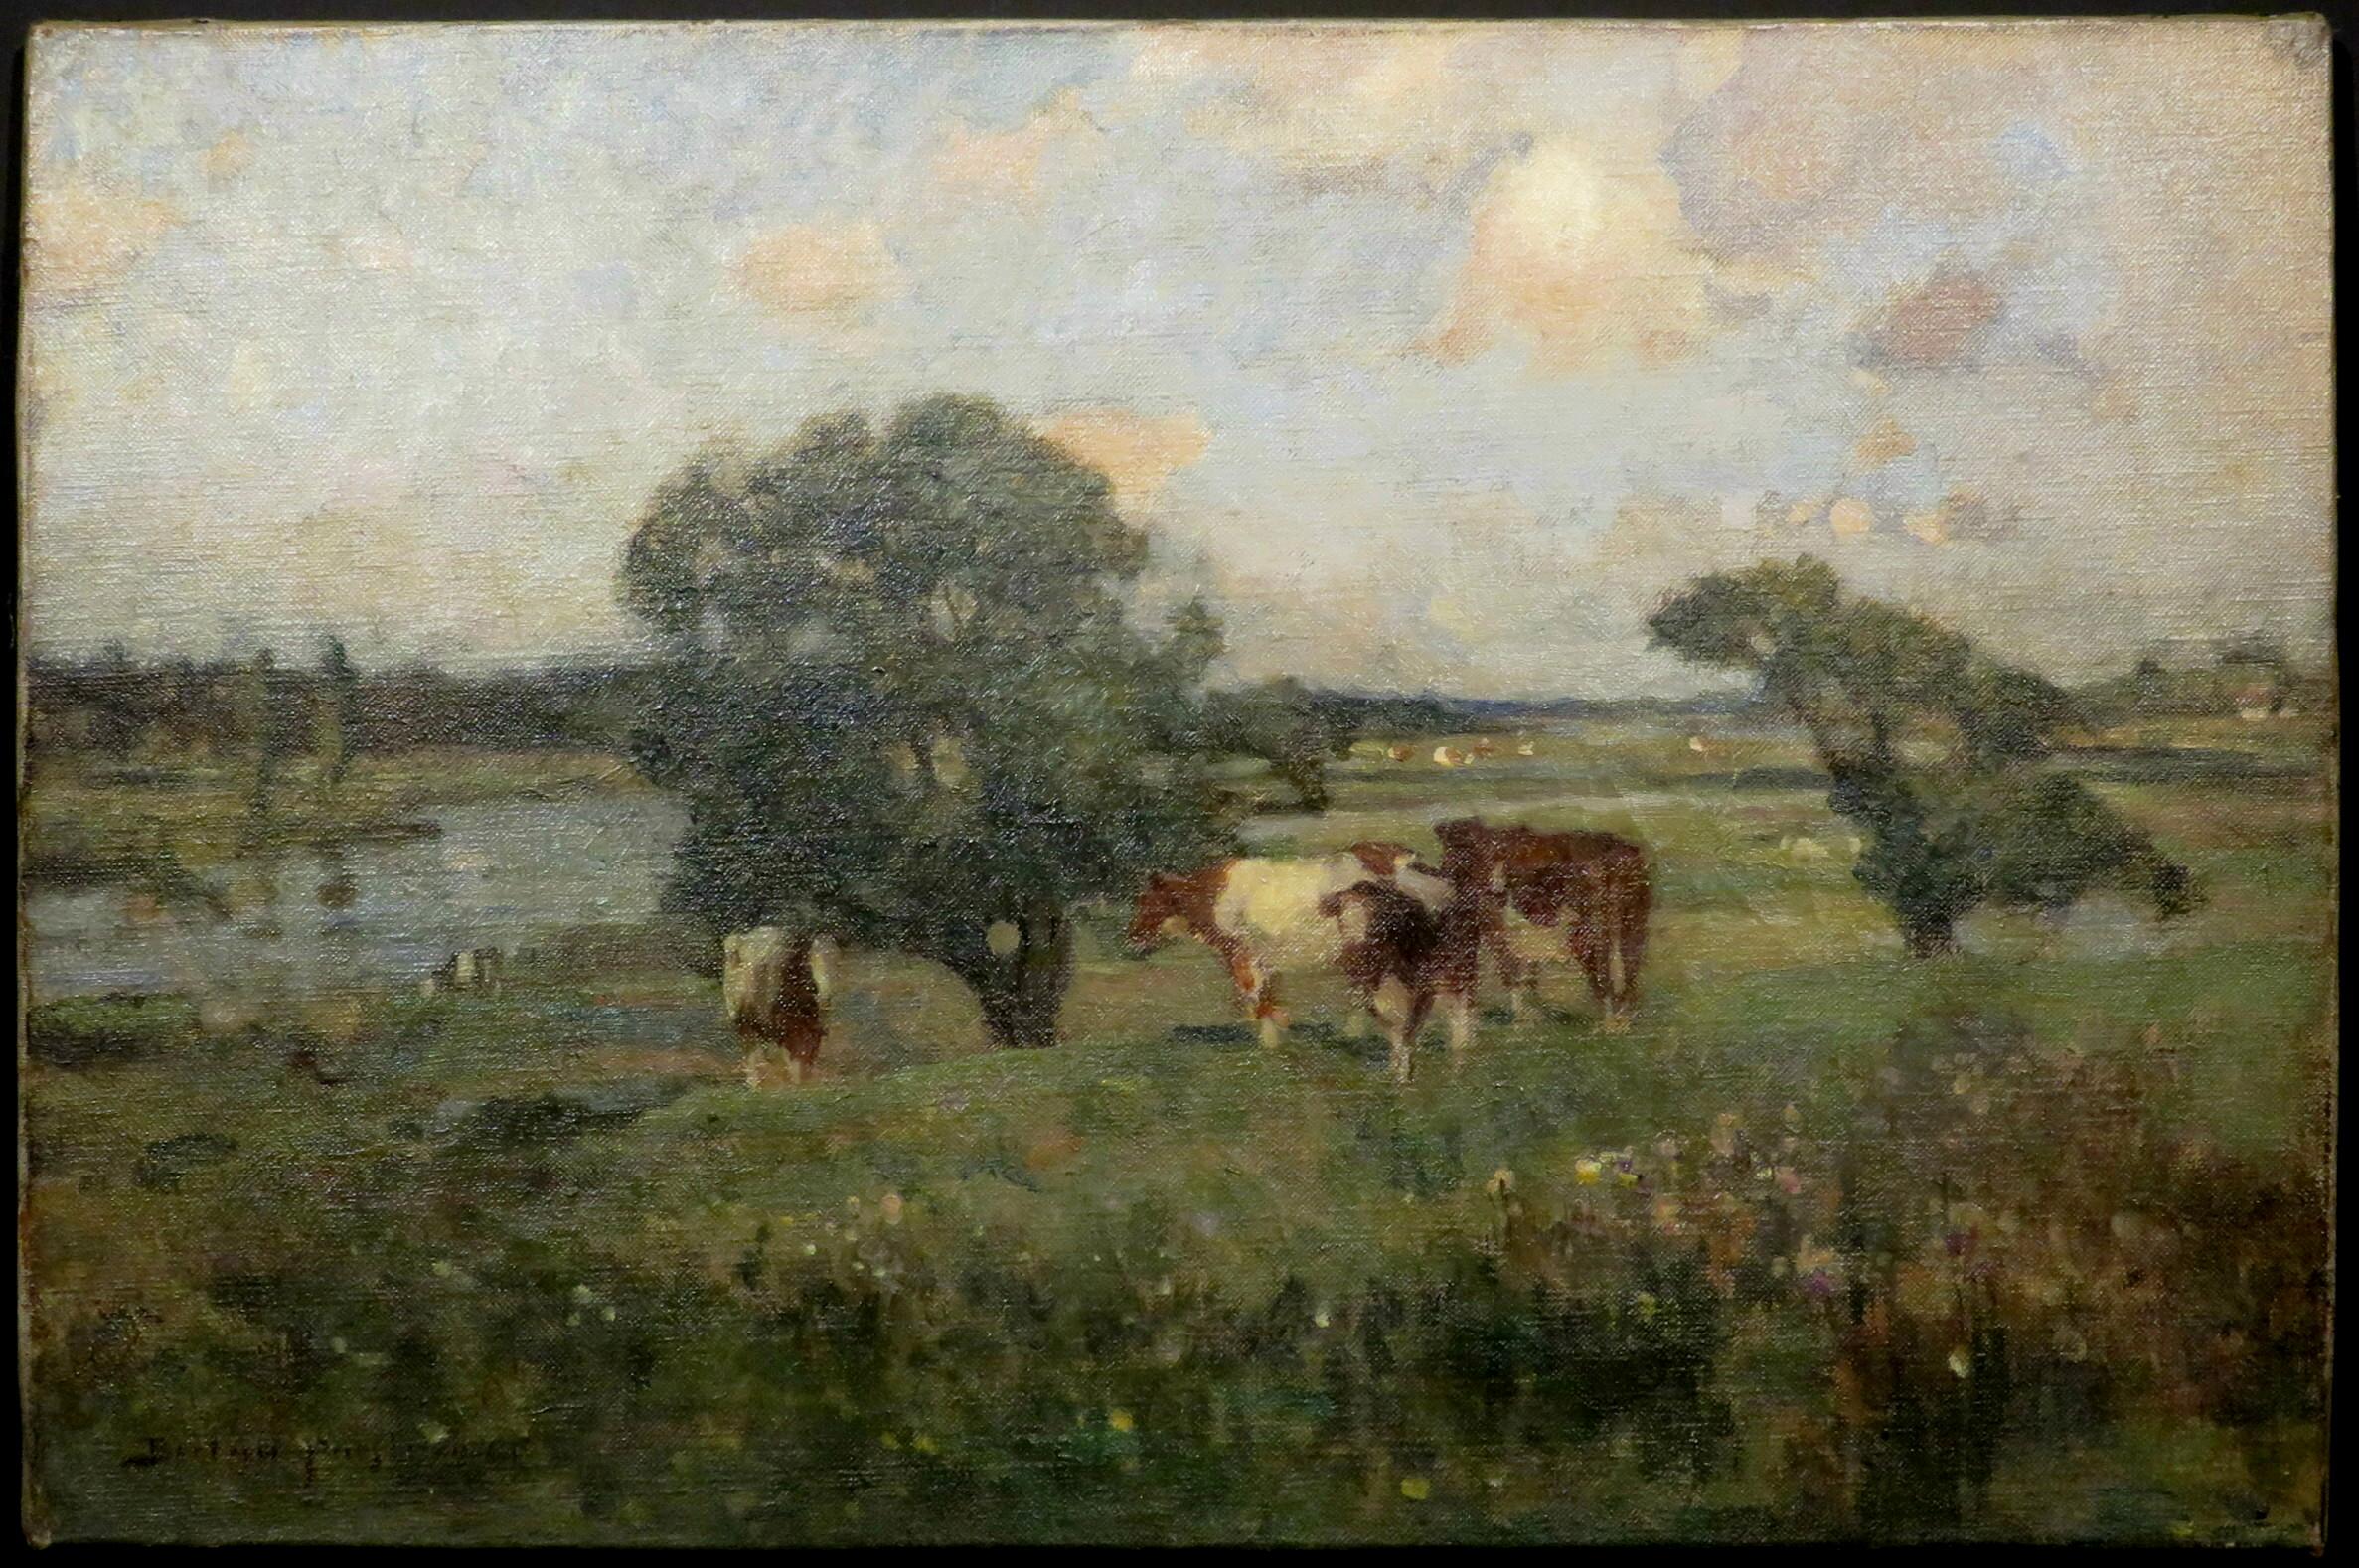 A sensitively rendered and bucolic 'plein air' pastoral landscape depicting cattle grazing by a shade tree, masterfully executed in the impressionist manner by Bertram Priestman, signed & dated '05 bottom left and set within an exceptional